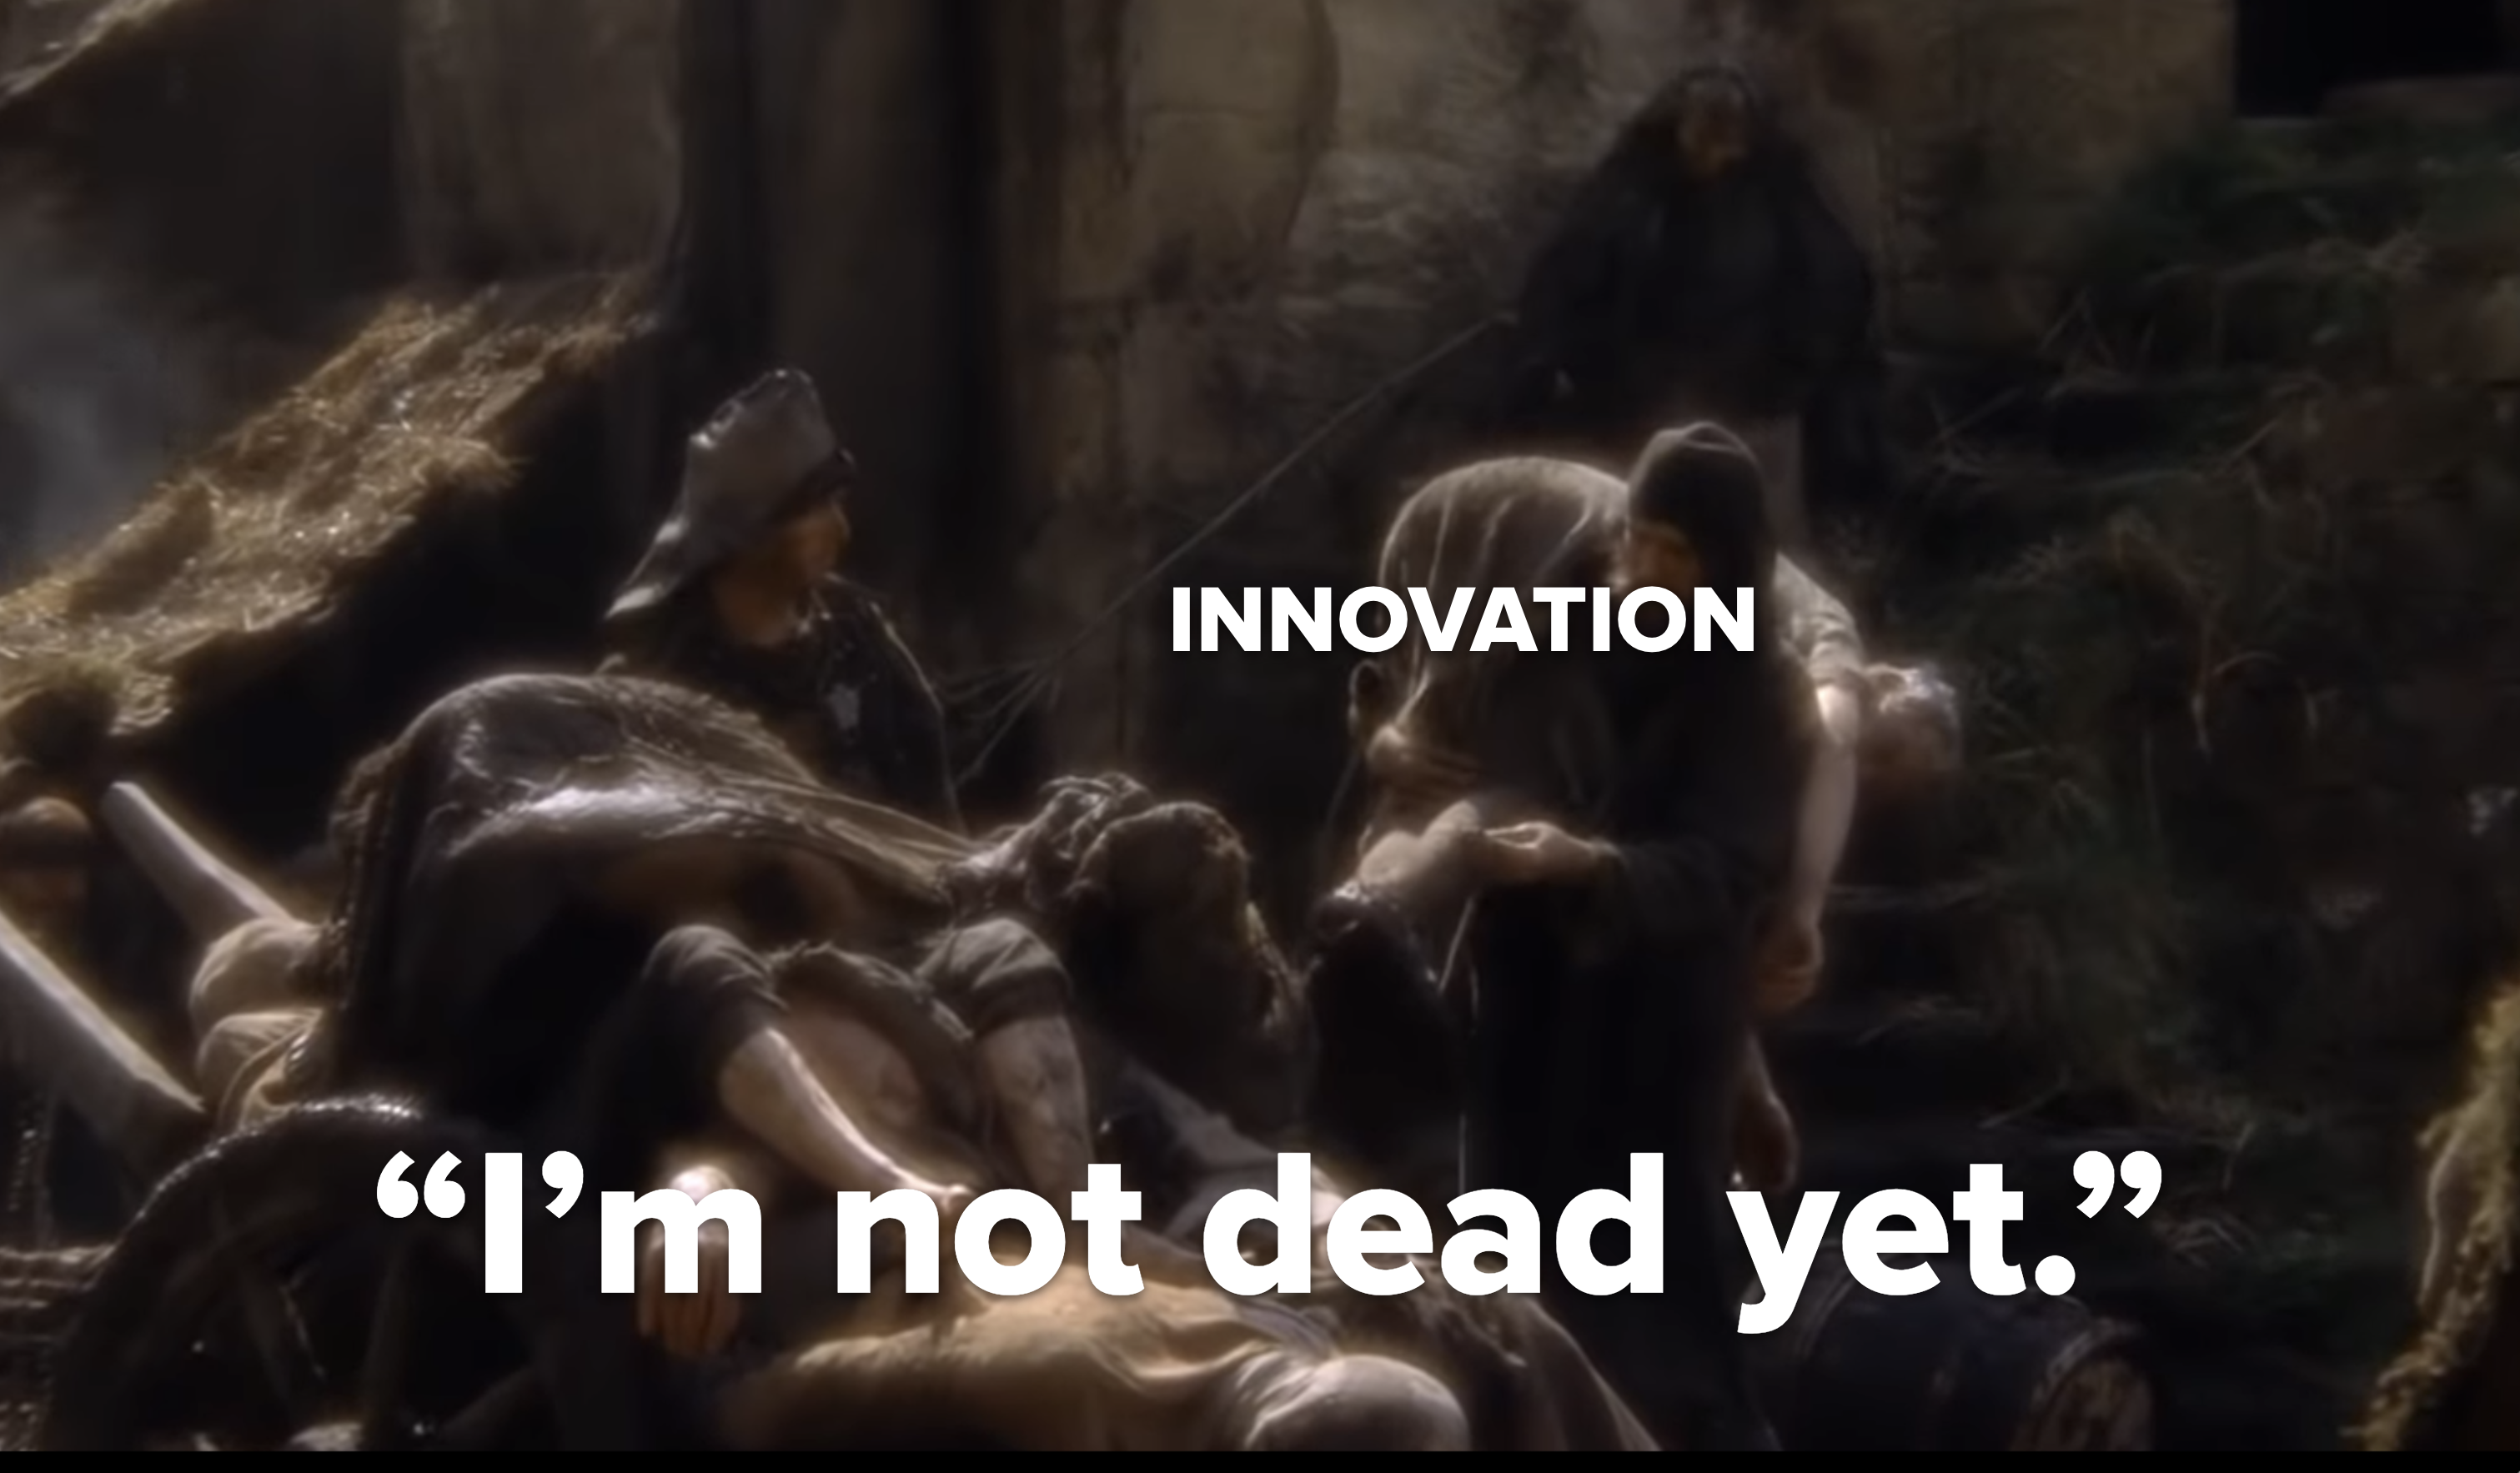 Innovation is dying image